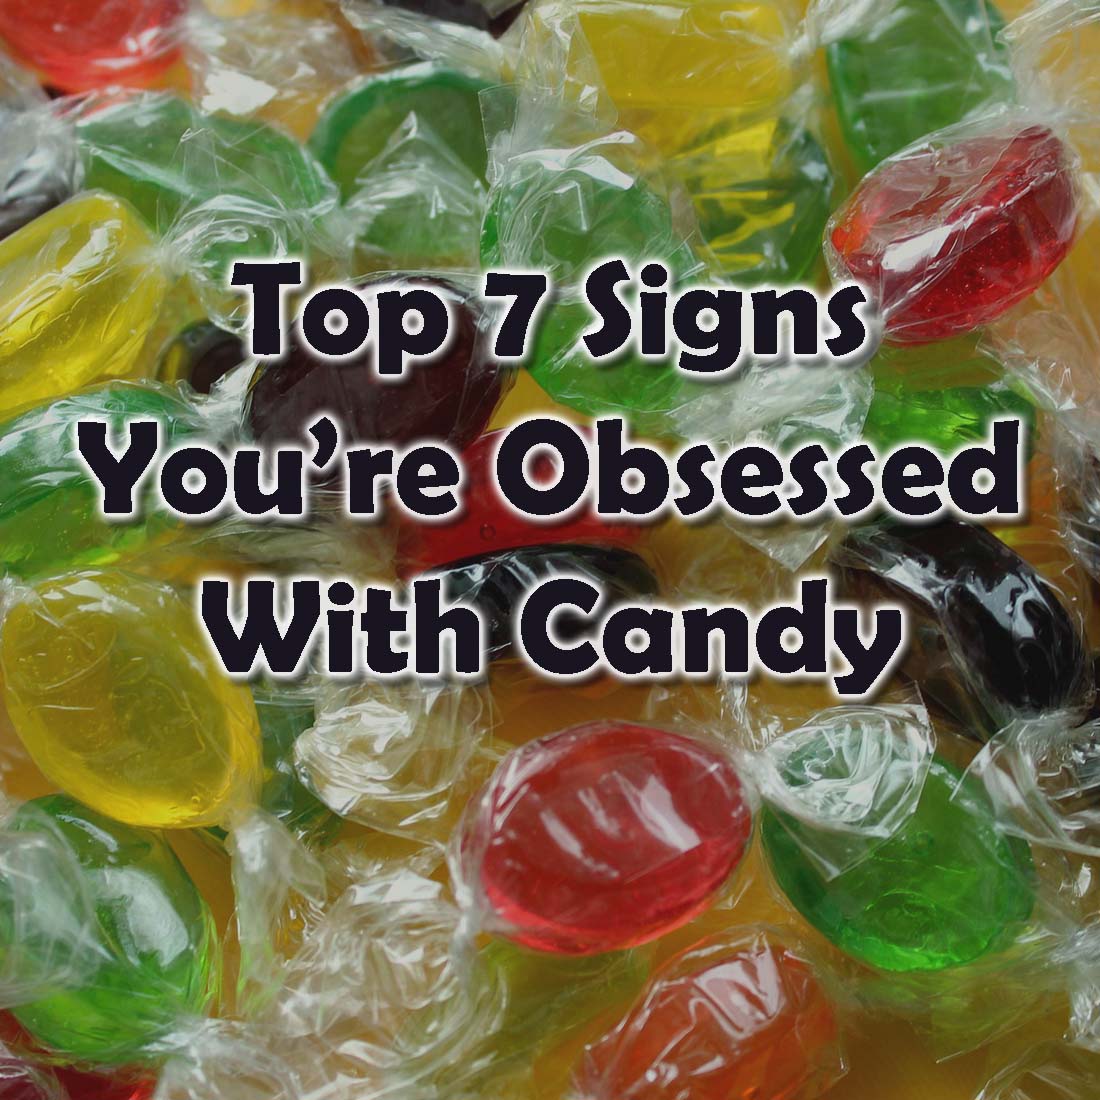 7 Signs You’re (Slightly) Obsessed With Candy!